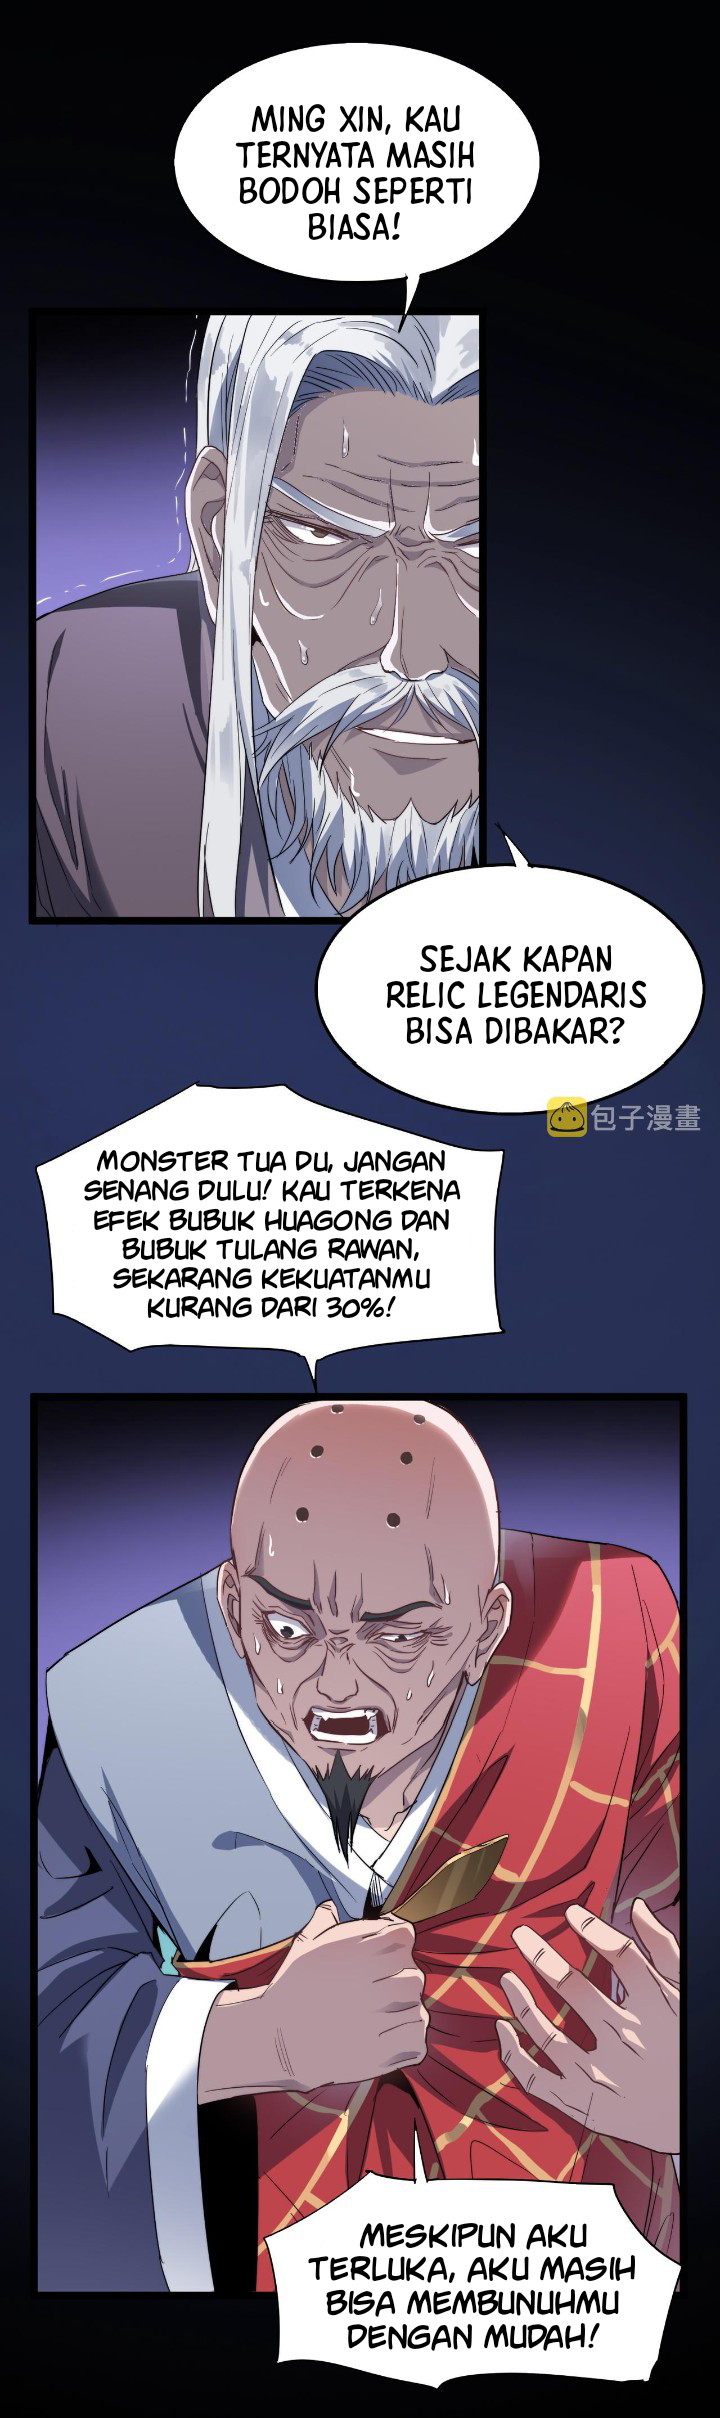 Dilarang COPAS - situs resmi www.mangacanblog.com - Komik building the strongest shaolin temple in another world 035 - chapter 35 36 Indonesia building the strongest shaolin temple in another world 035 - chapter 35 Terbaru 28|Baca Manga Komik Indonesia|Mangacan